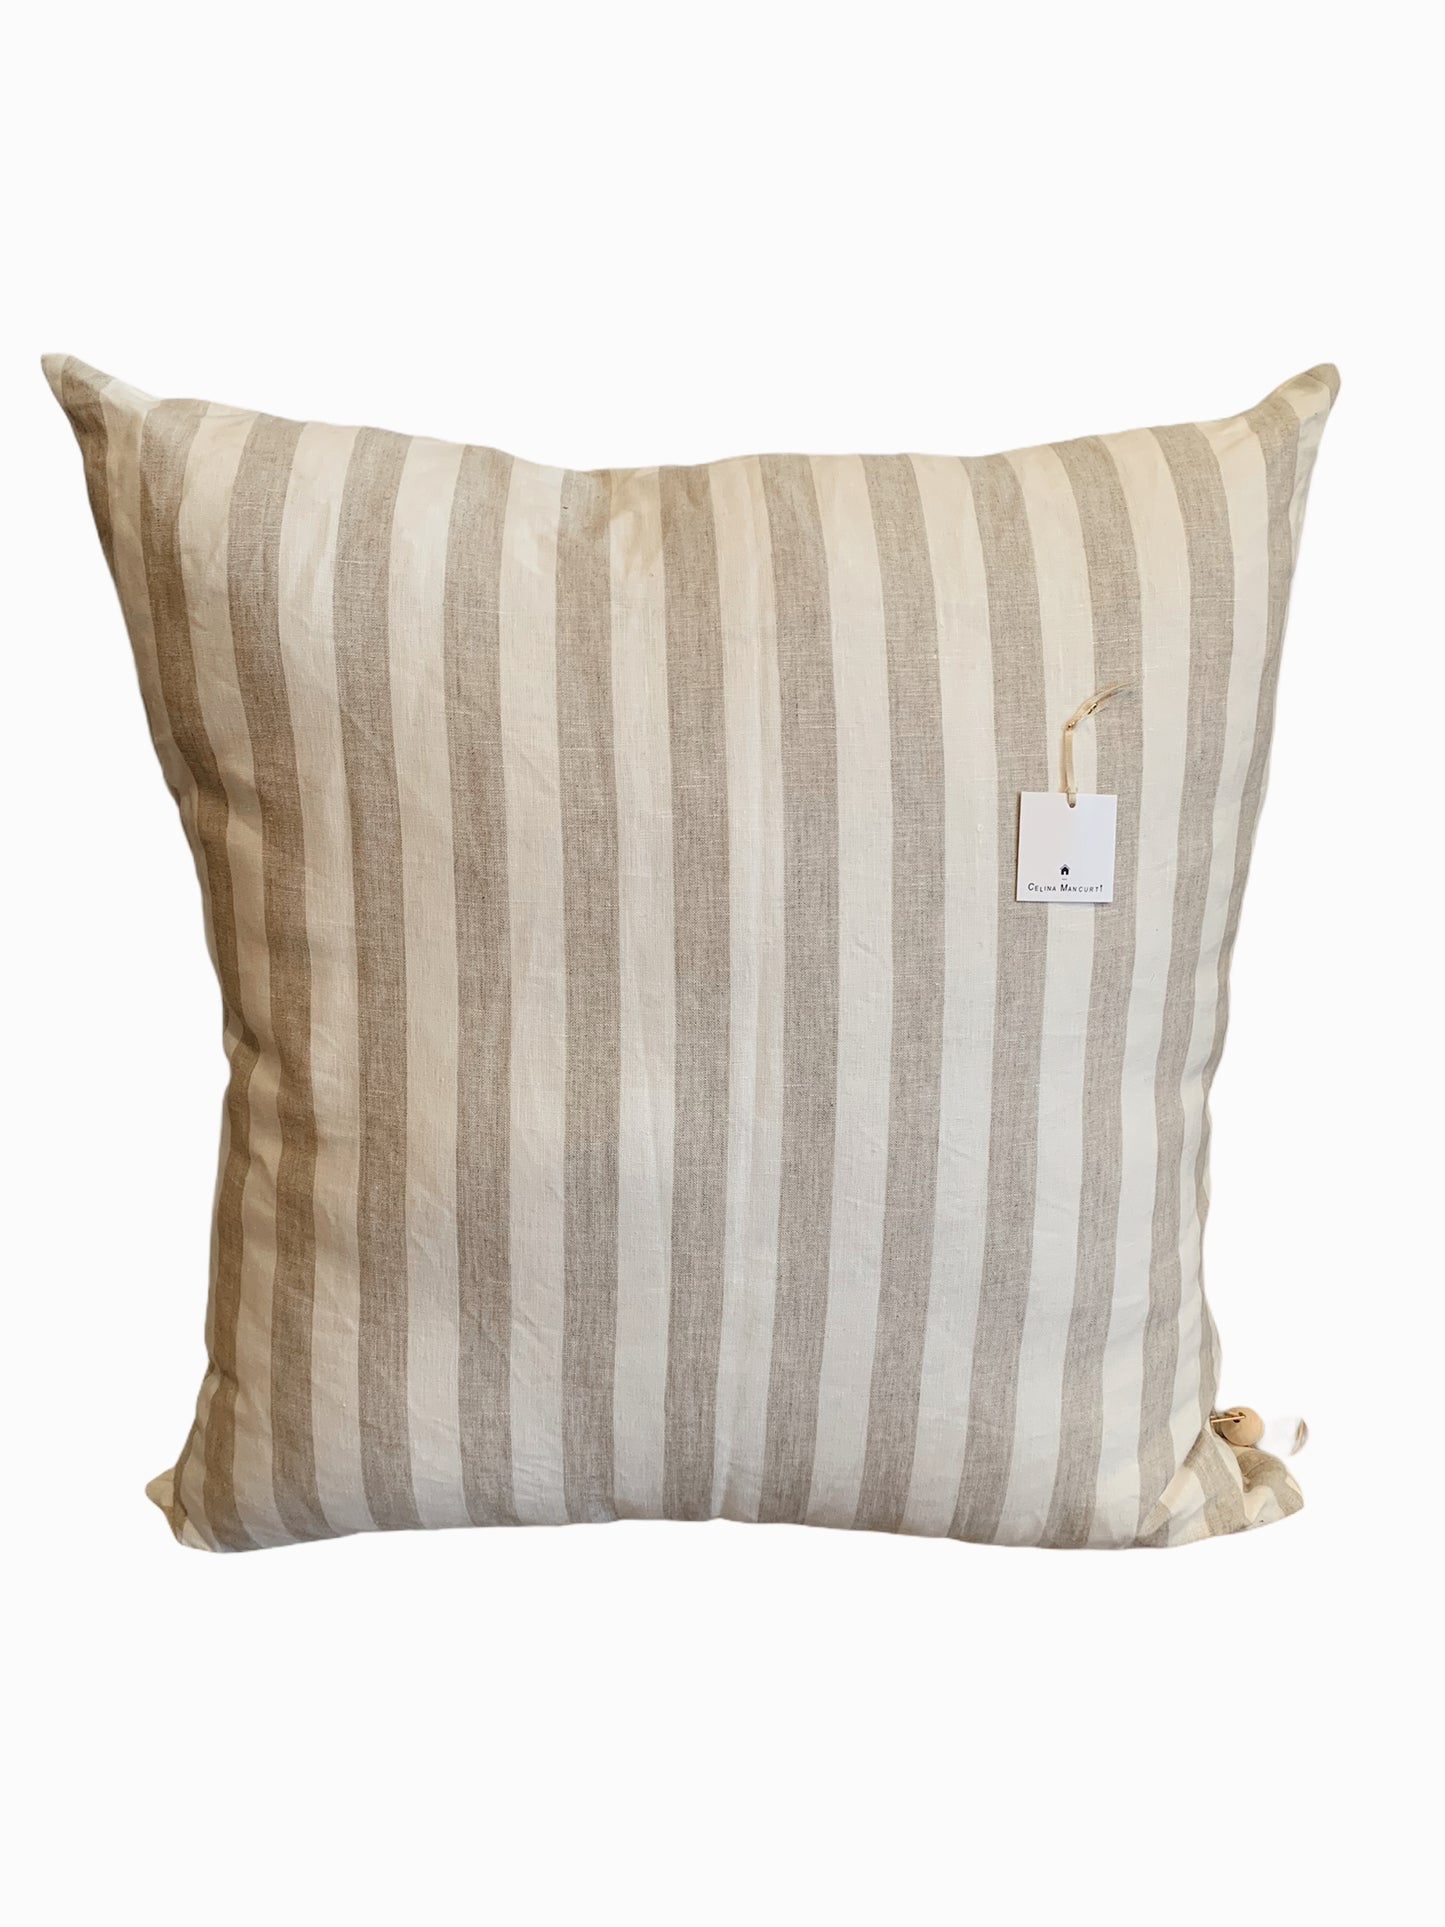 Oatmeal and Ivory Stripes Floor Pillow